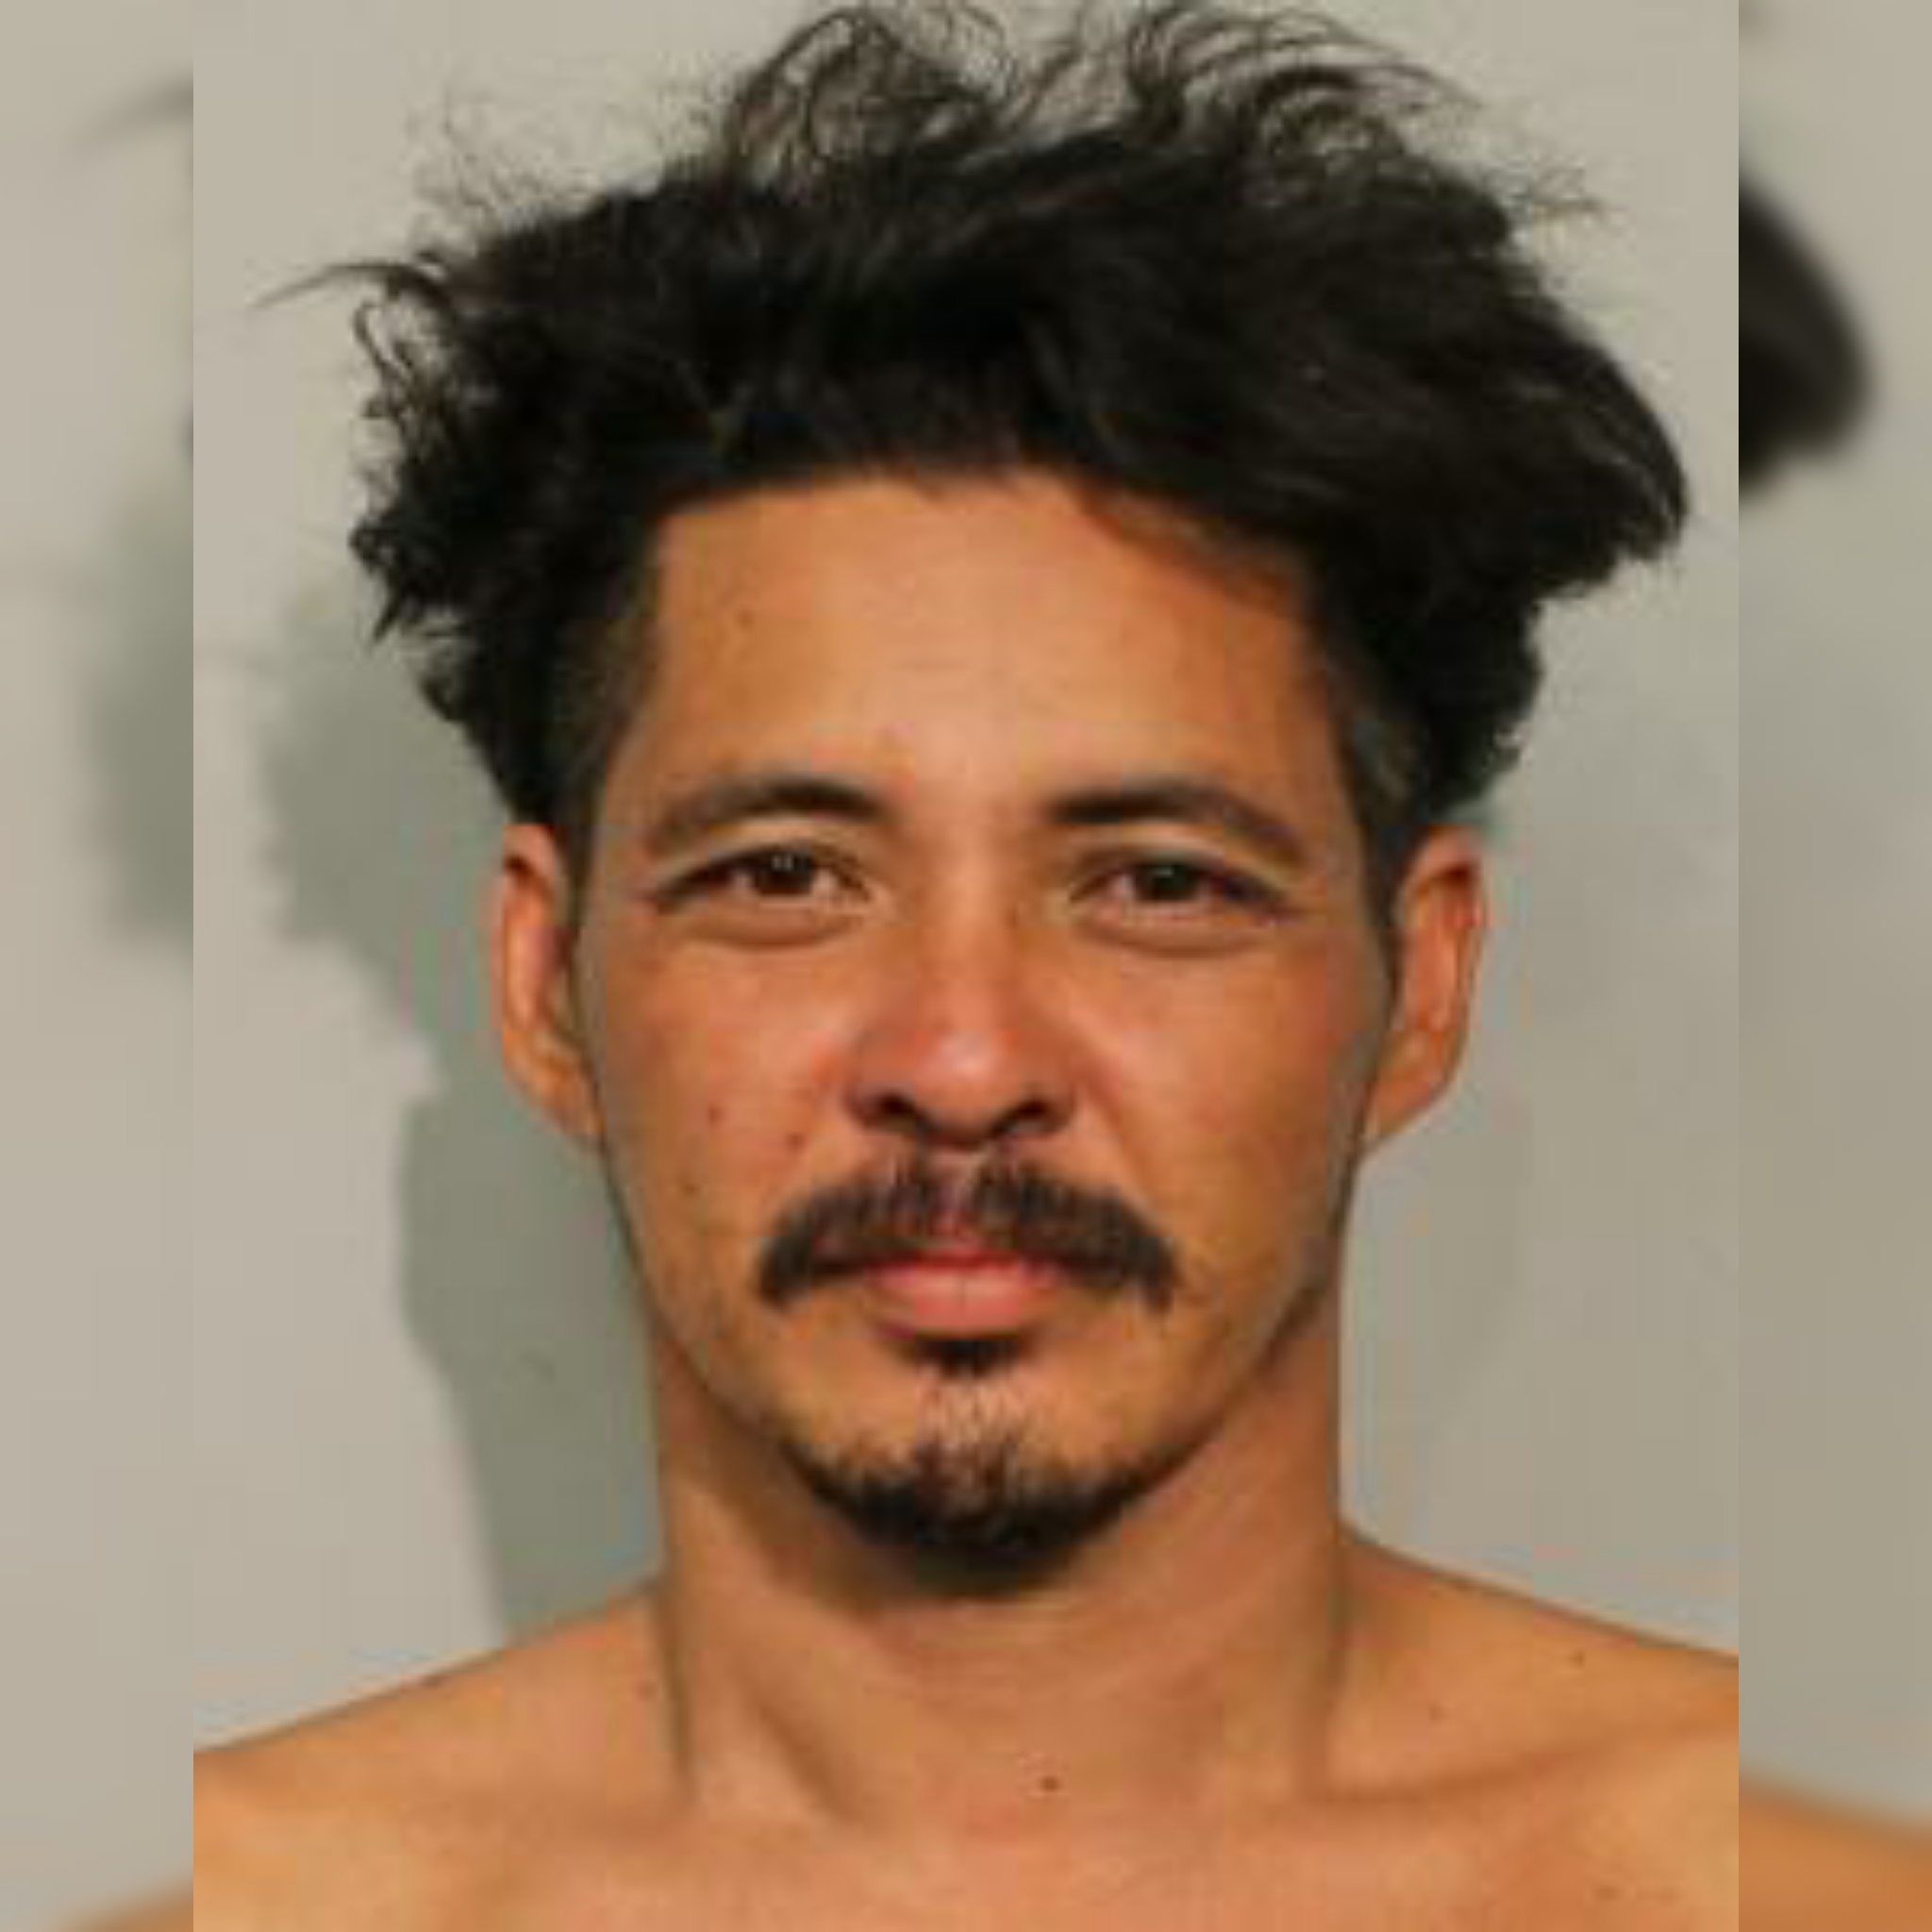 Kona Man Jason Delatorre Wanted For Questioning In Connection With A Criminal Investigation